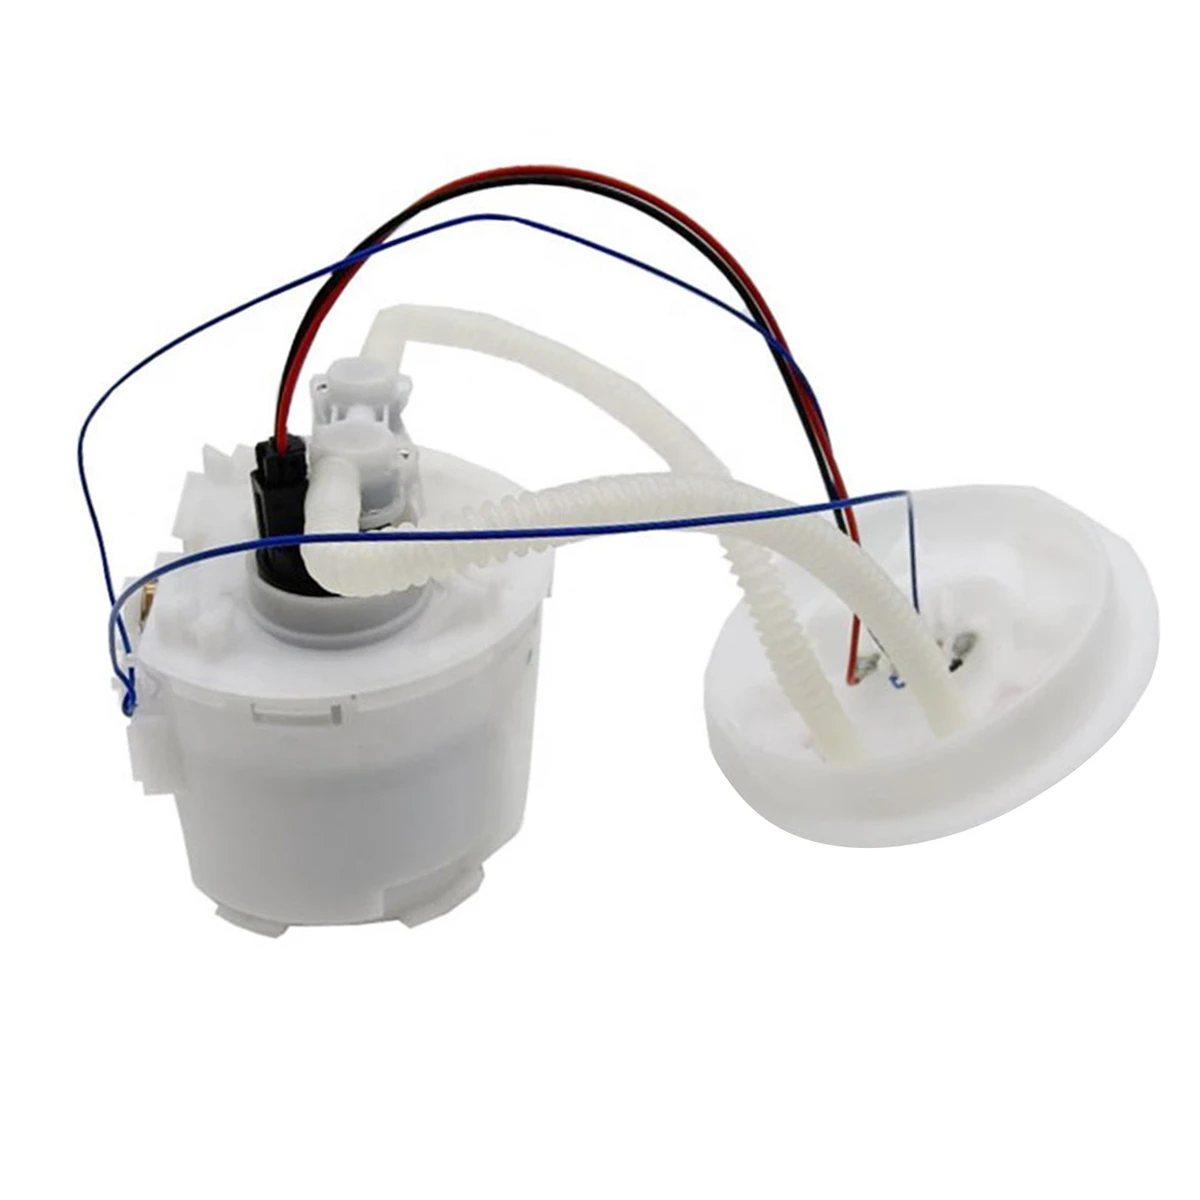 

1388671 Car Fuel Pump Module embly for Ford Focus 98-04 Transit Connect 05-13 97FB3H307 Engine Fuel Tank Pump